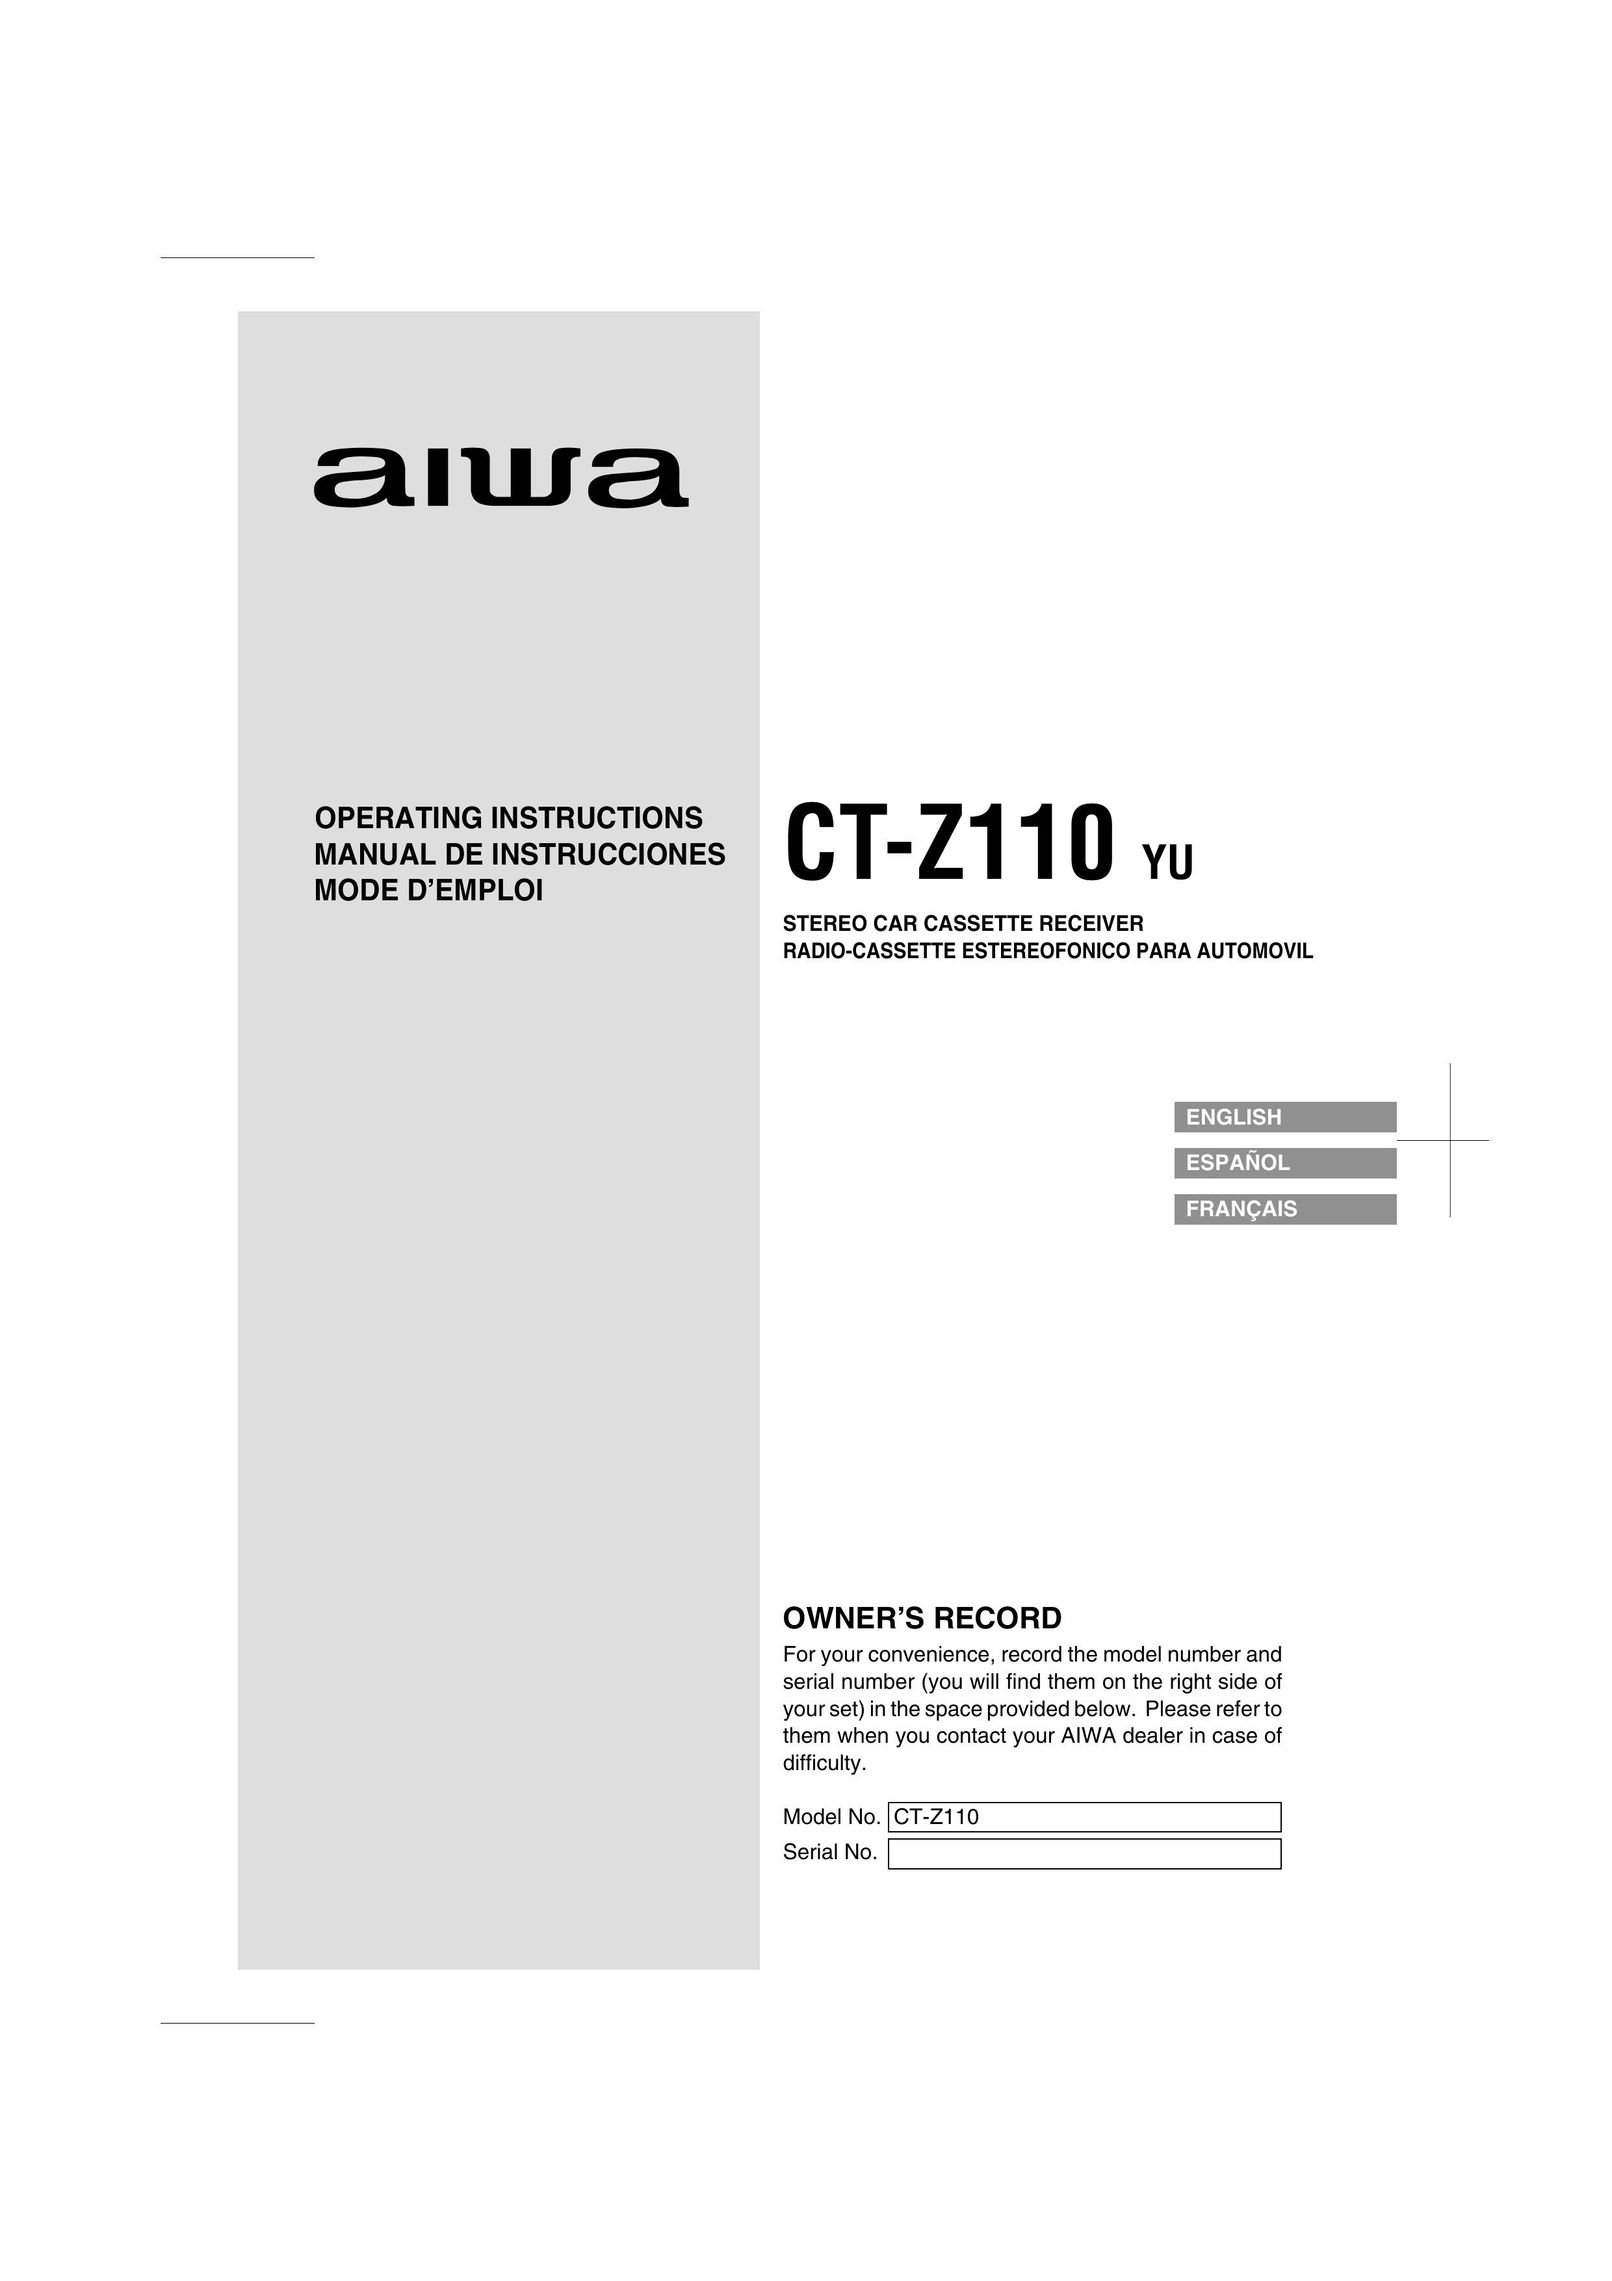 Aiwa CT-Z110 Car Stereo System User Manual (Page 1)